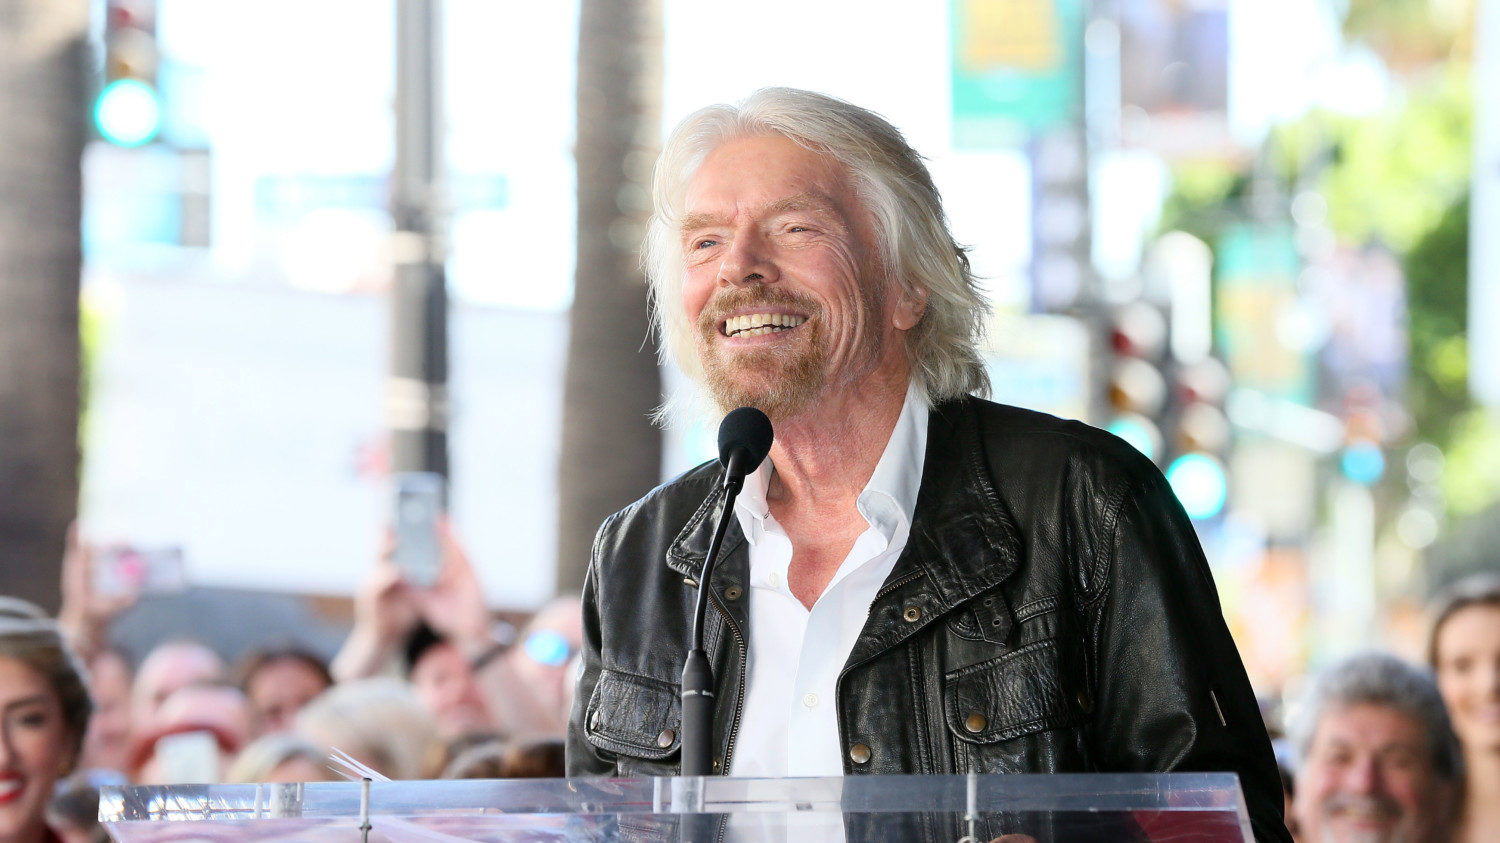 Sir Richard Branson Honored With Star On The Hollywood Walk Of Fame